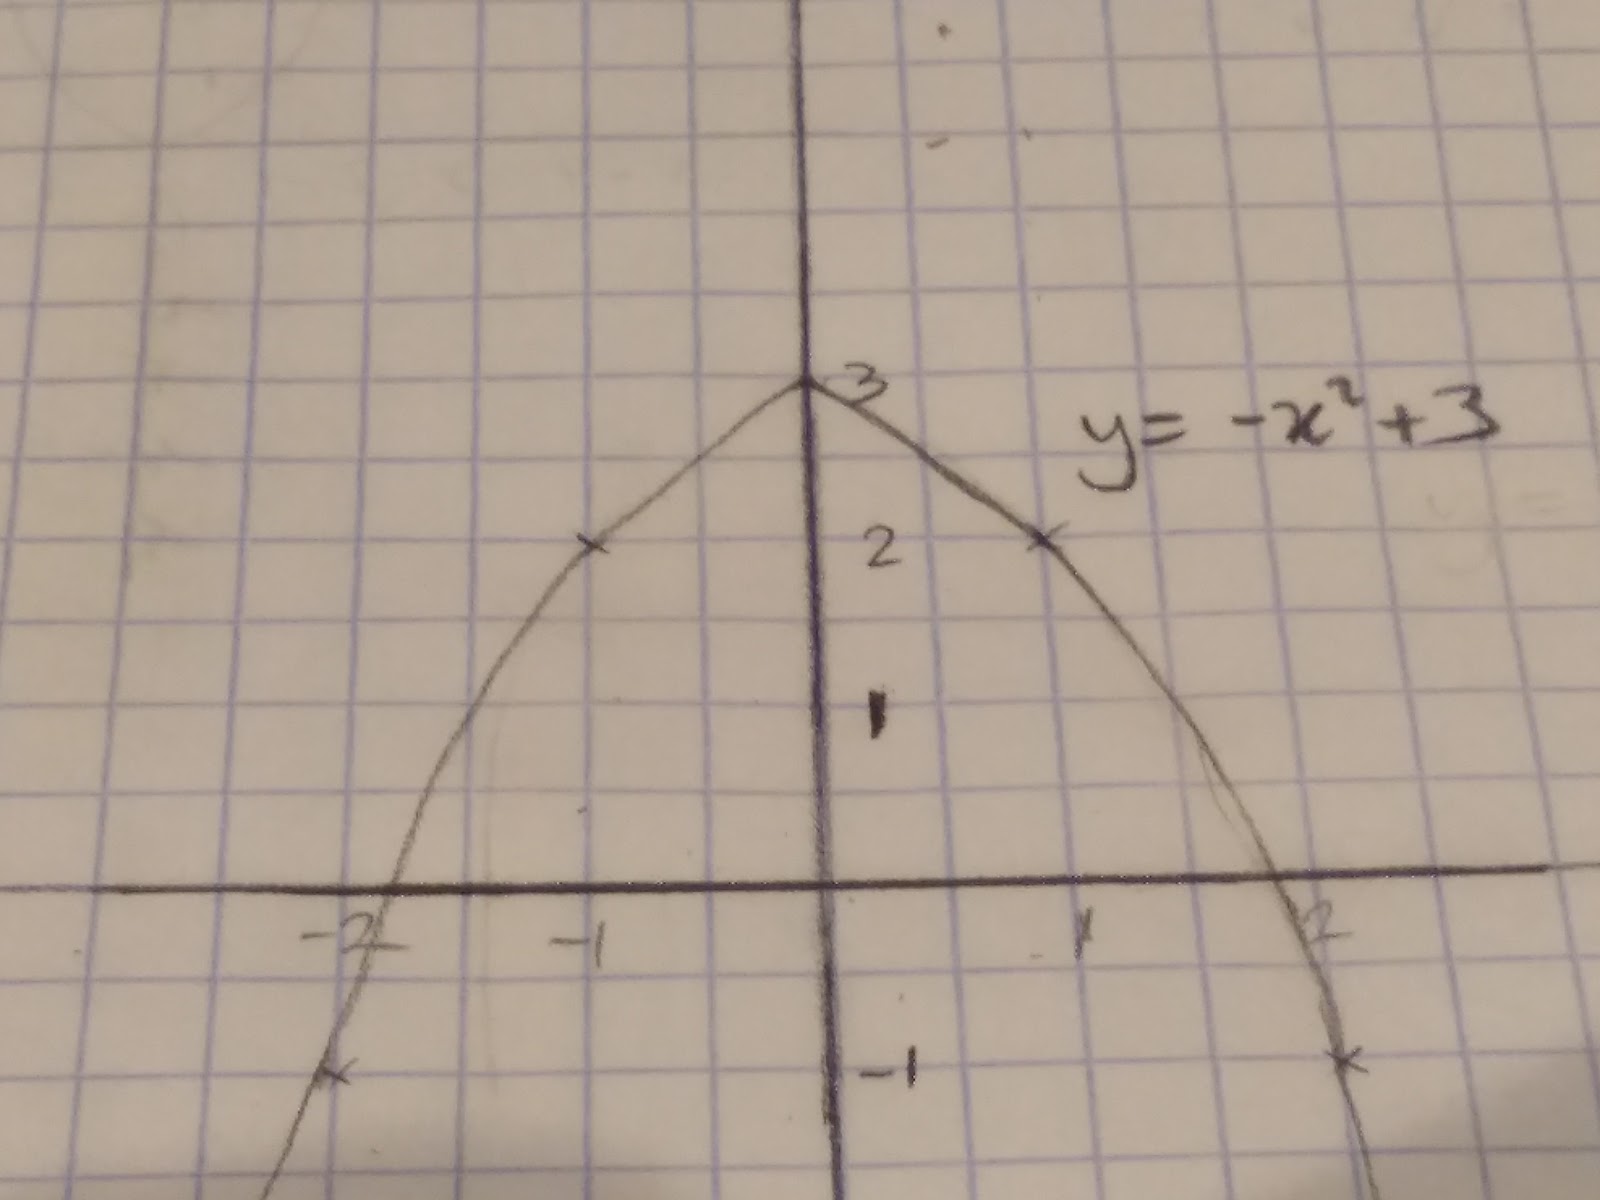 Sketching Quadratic Graphs from an Equation | Teaching Resources